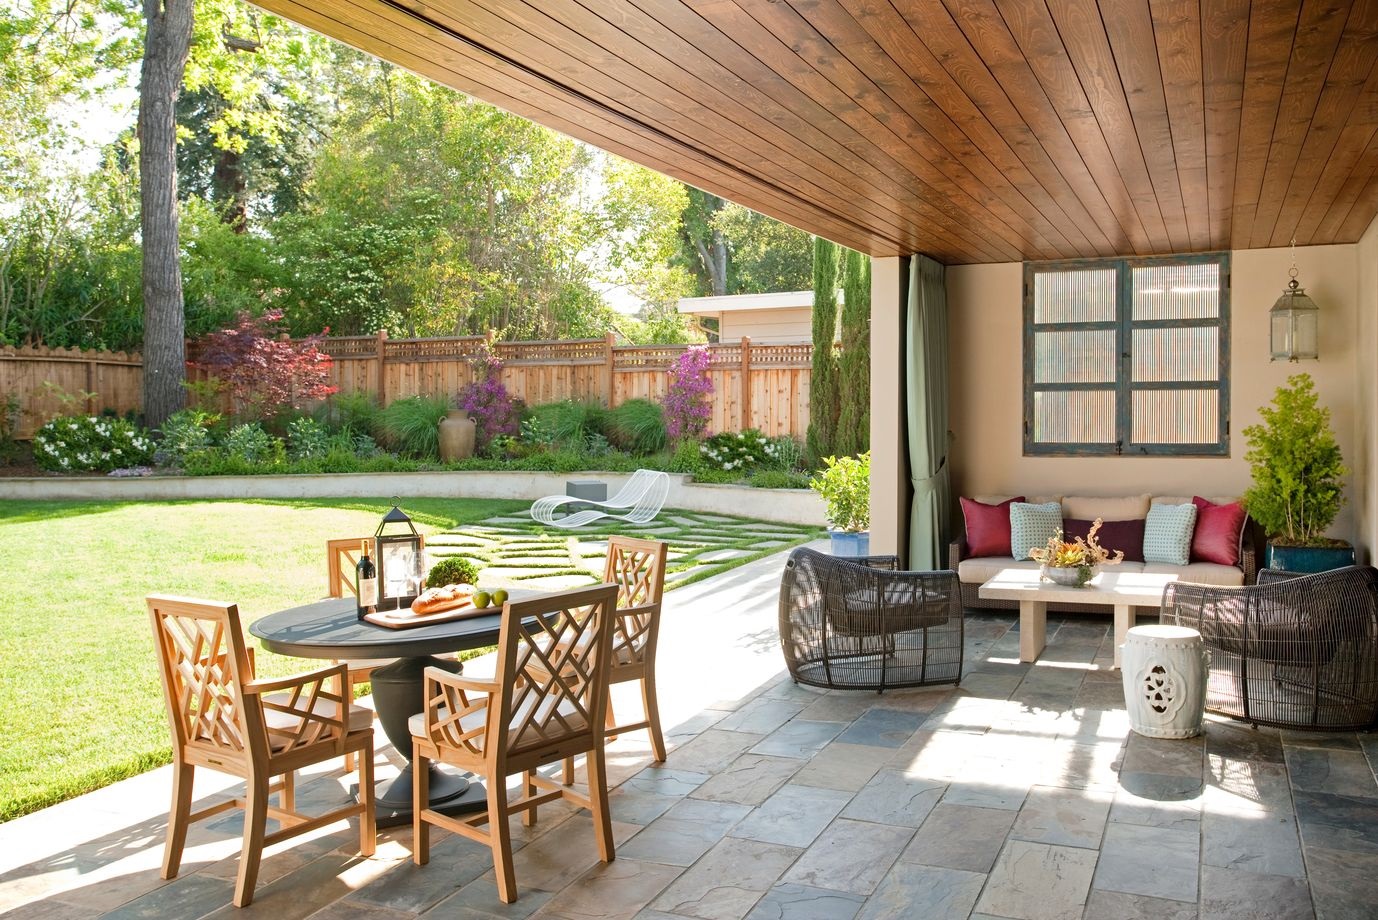 How to Make the Most of Your Outdoor Living Space With a Deck